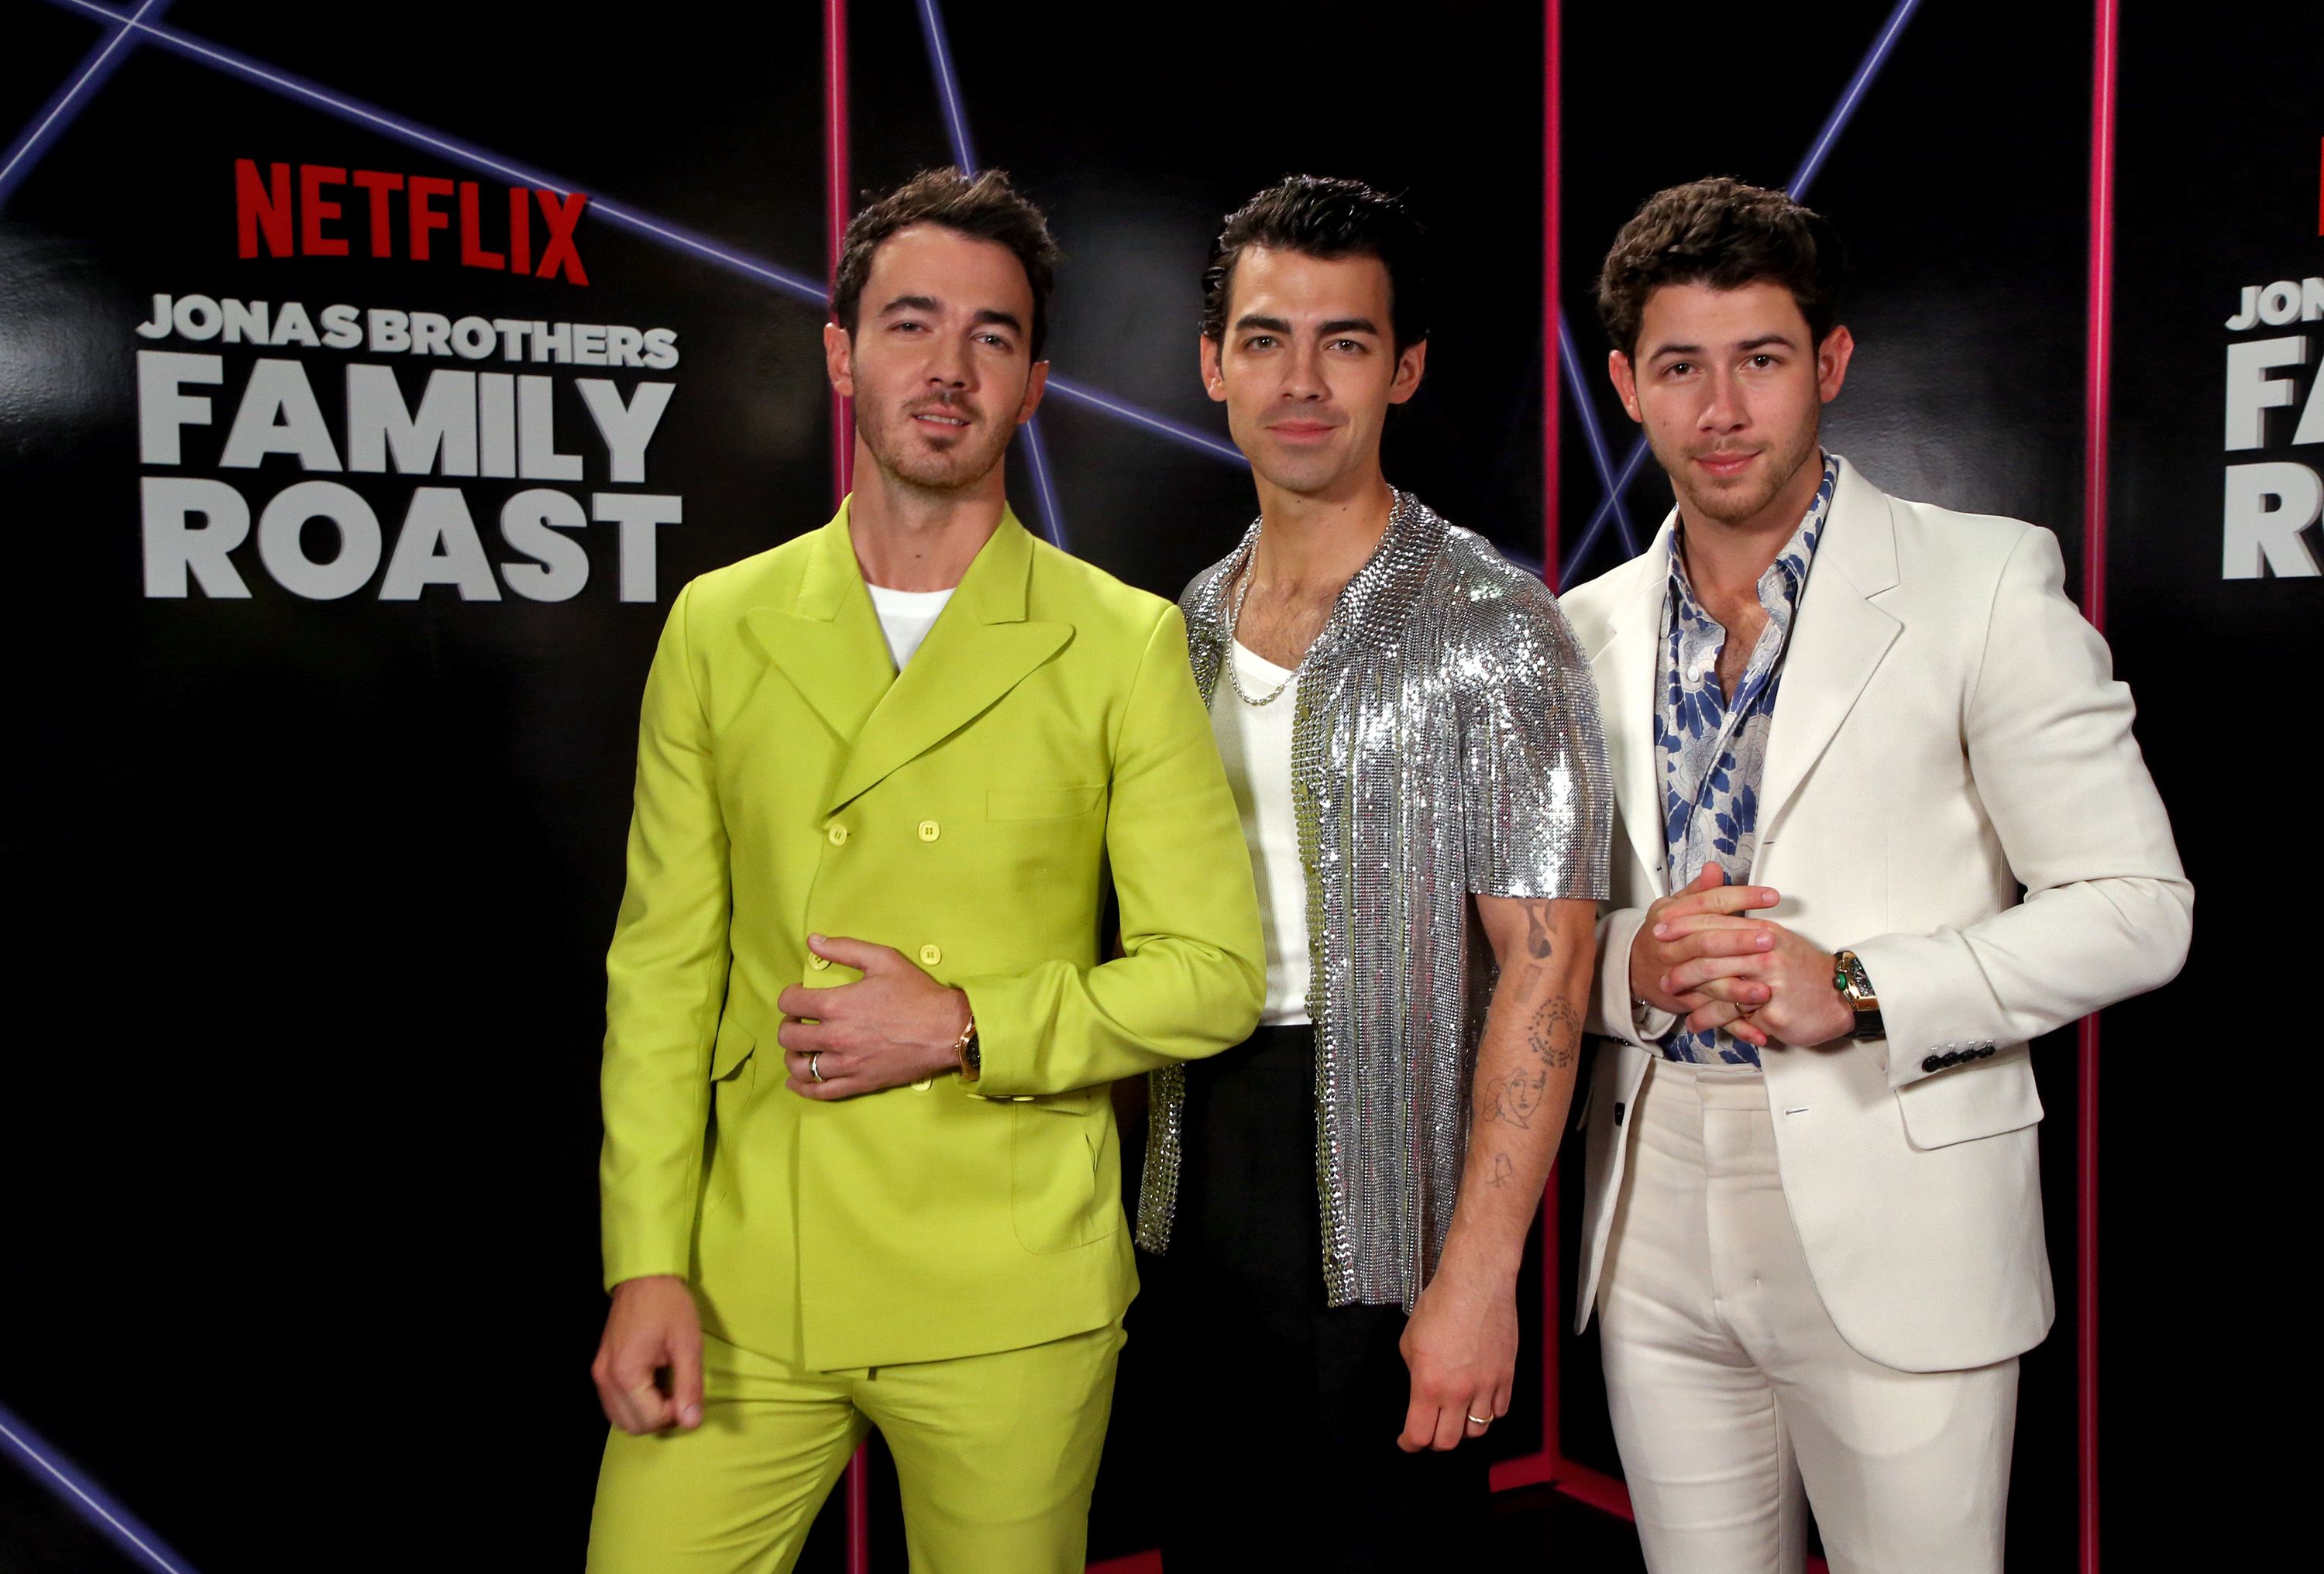 Jonas Brothers get roasted by family and celebrities